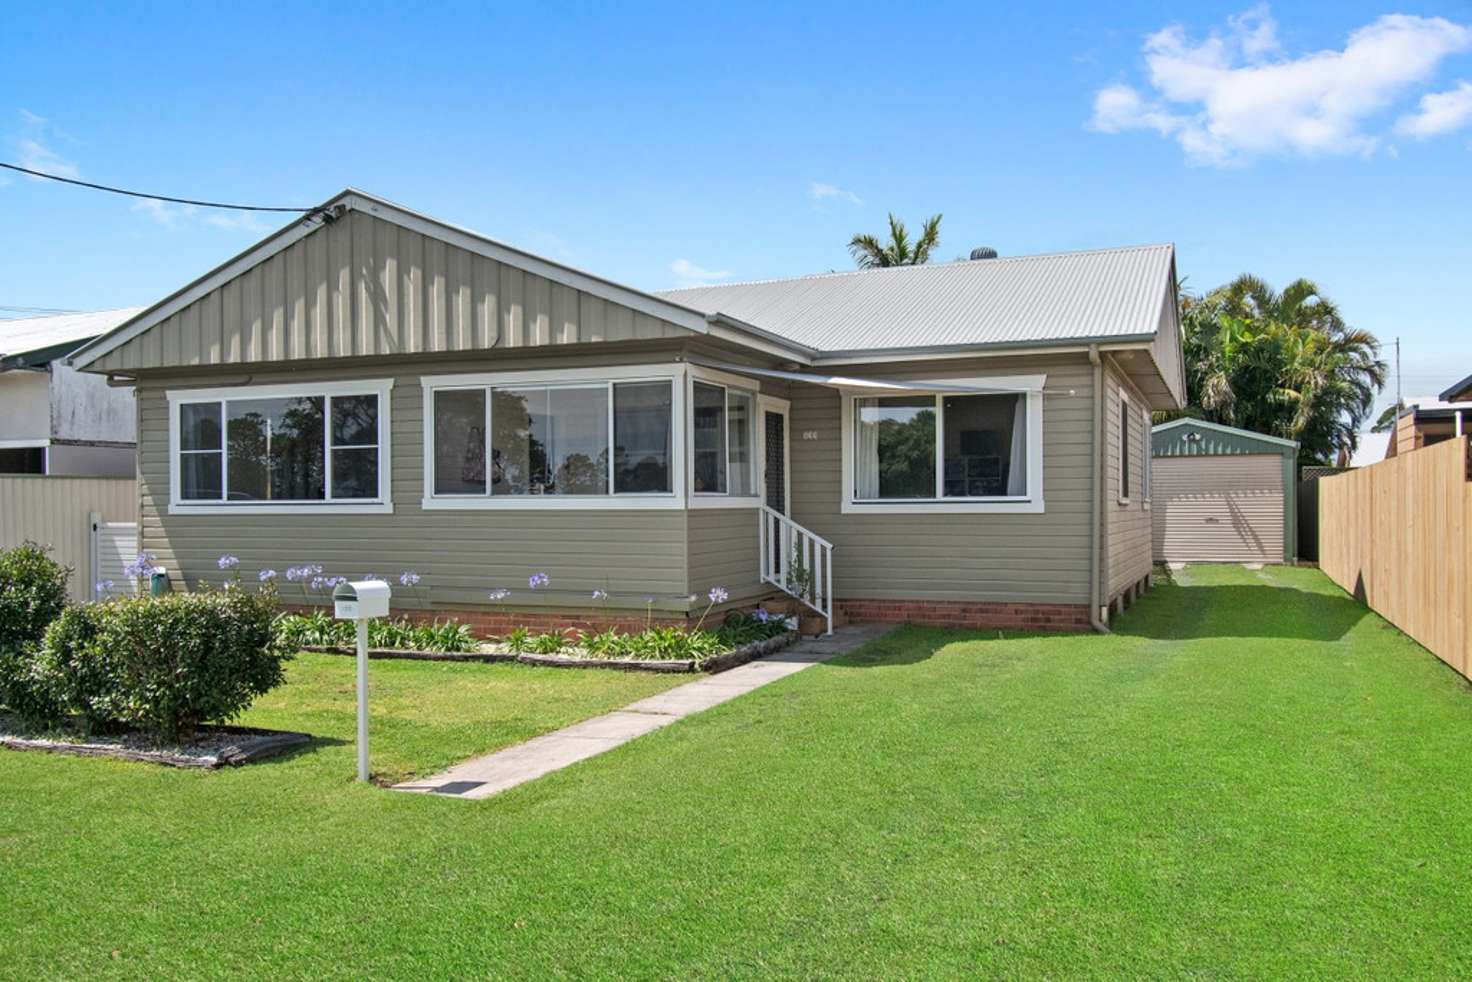 Main view of Homely house listing, 133 Swift Street, Ballina NSW 2478